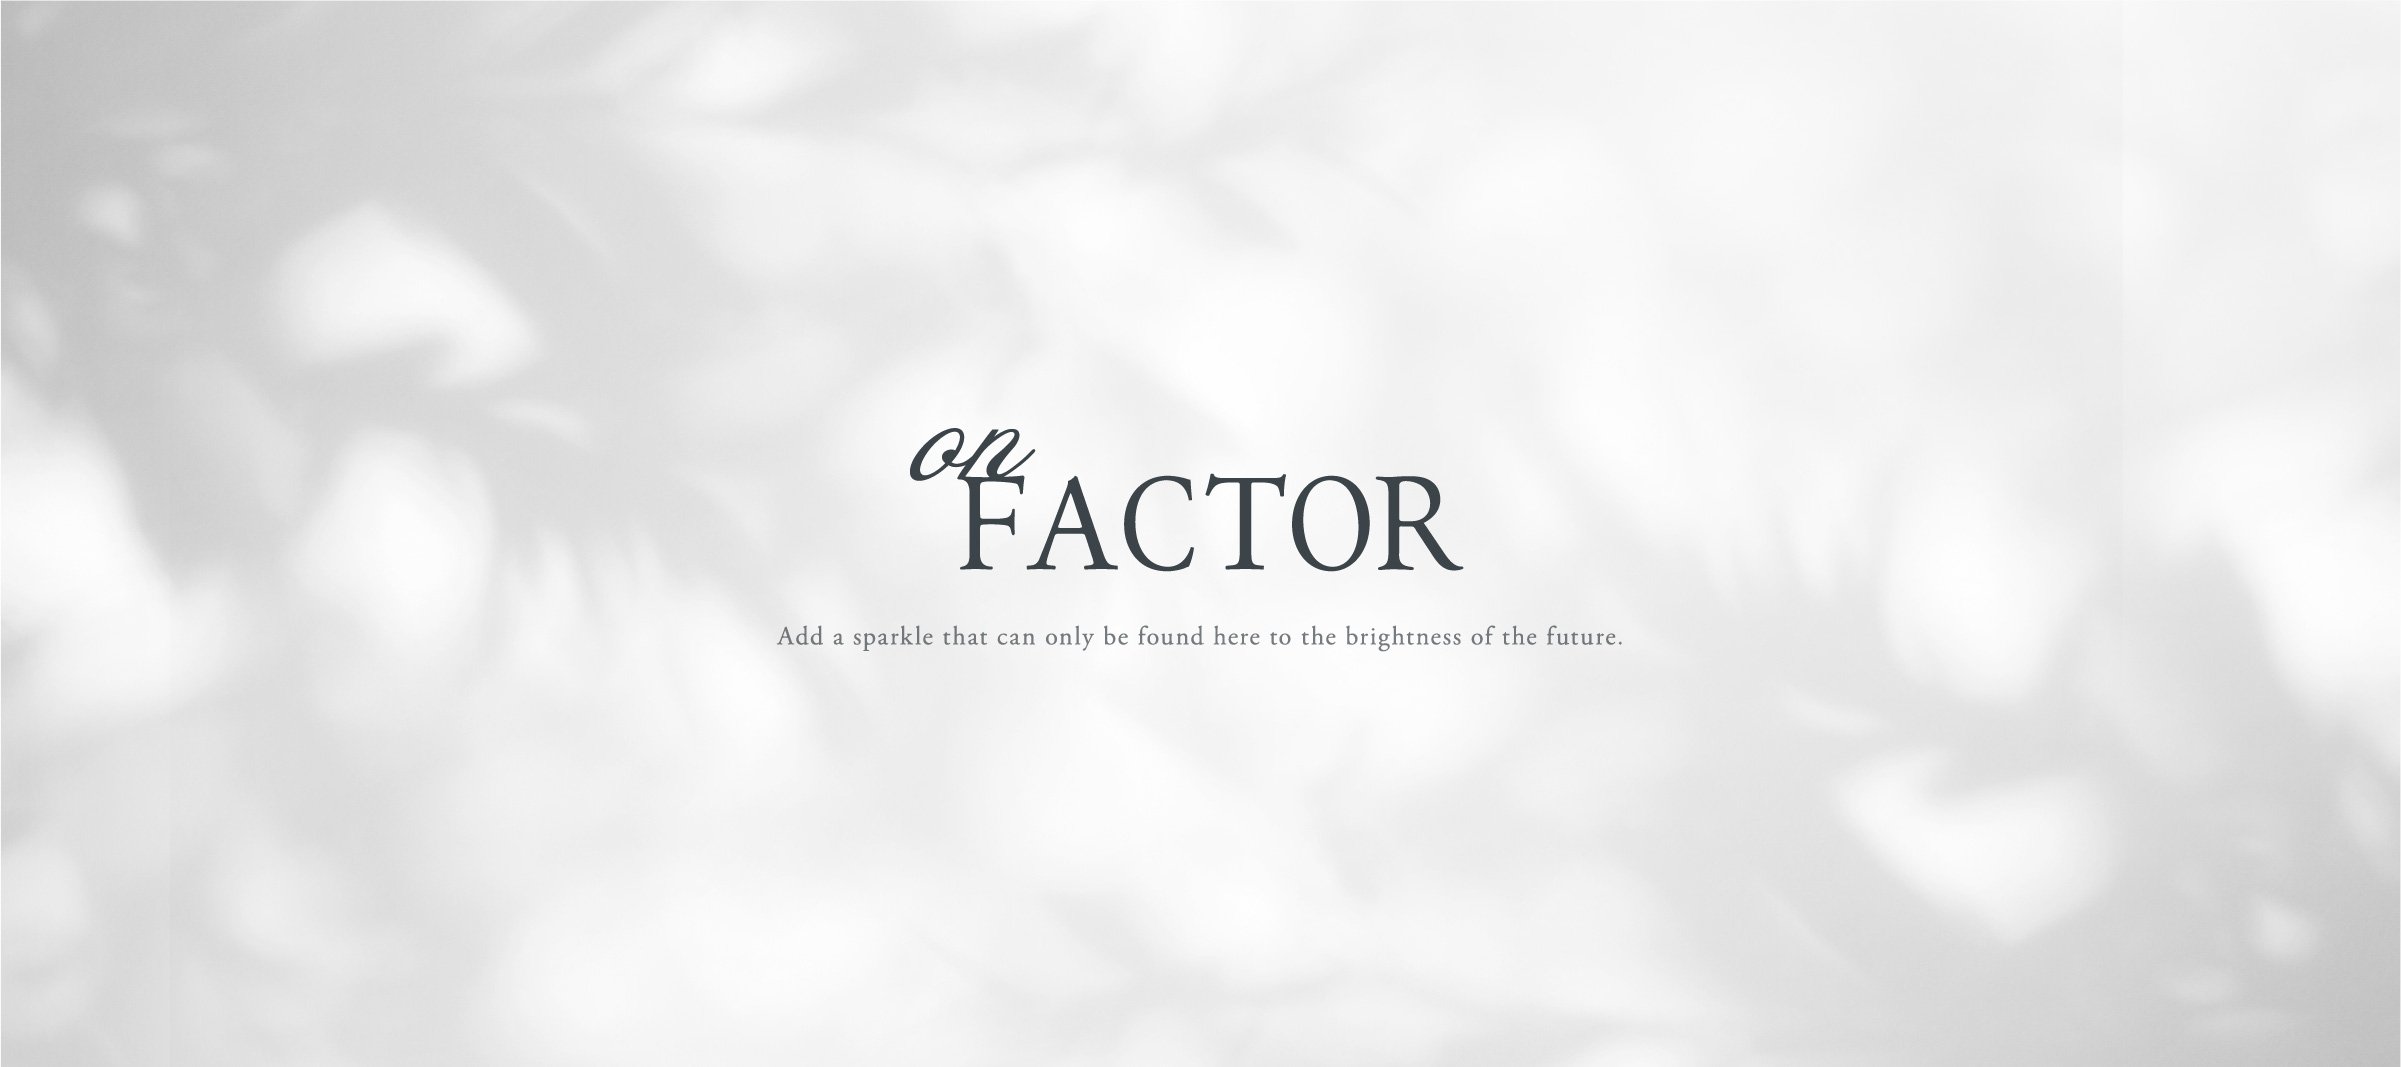 on FACTOR Add a sparkle that can only be found here to the brightness of the future. image photo